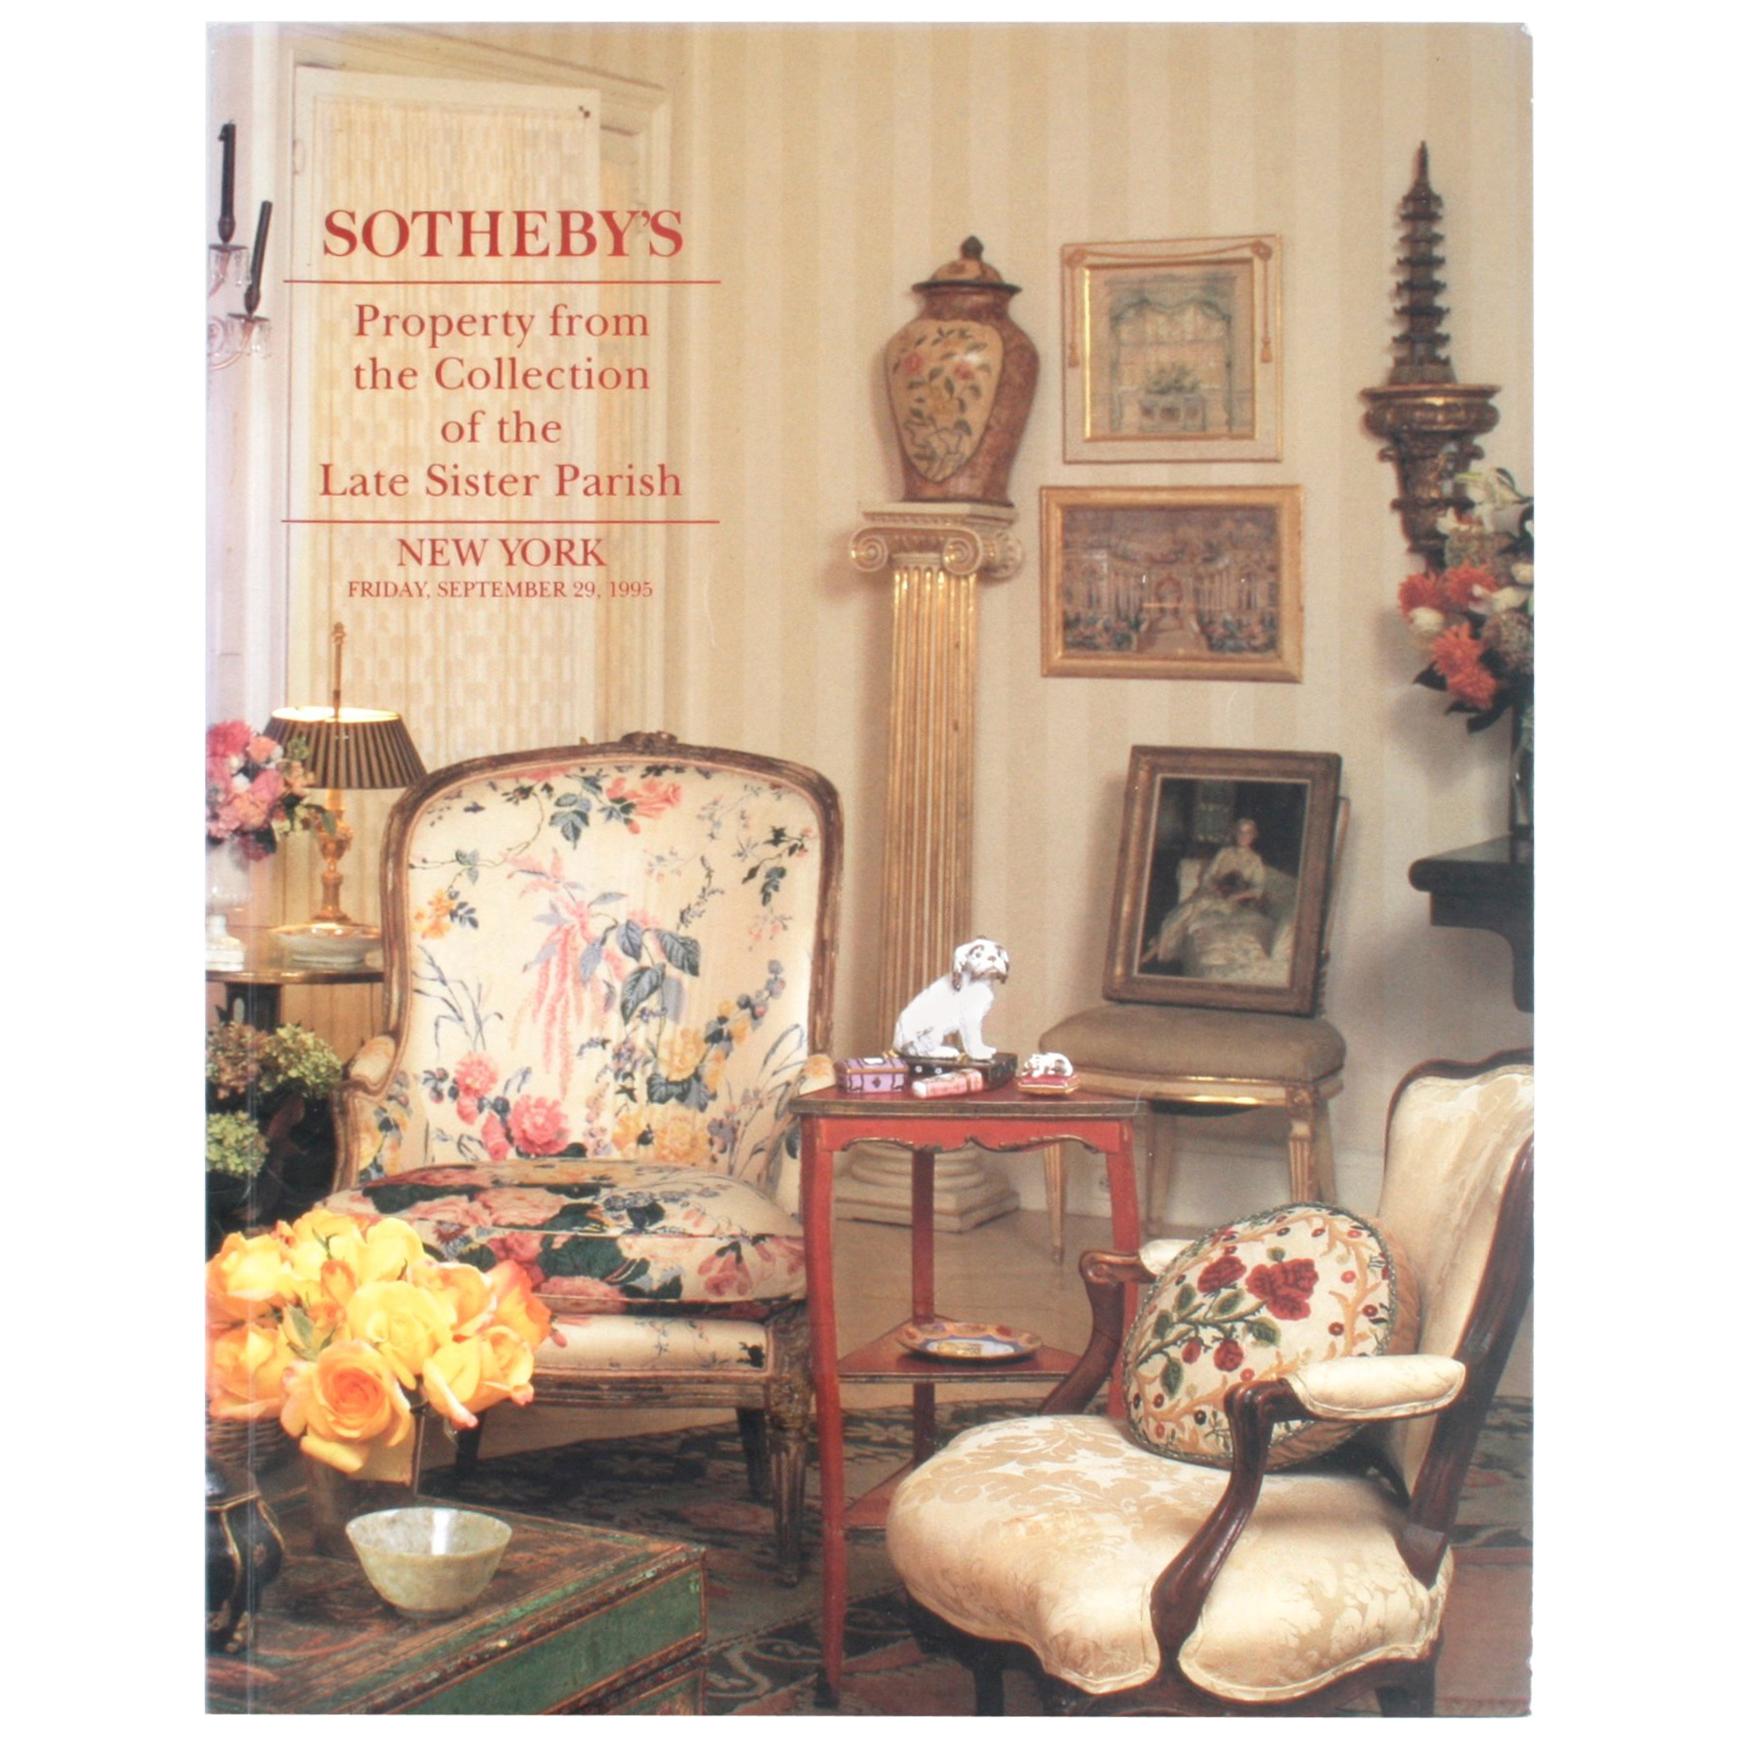 Sotheby's 1995 Catalogue, Property from the Collection of the Late Sister Parish